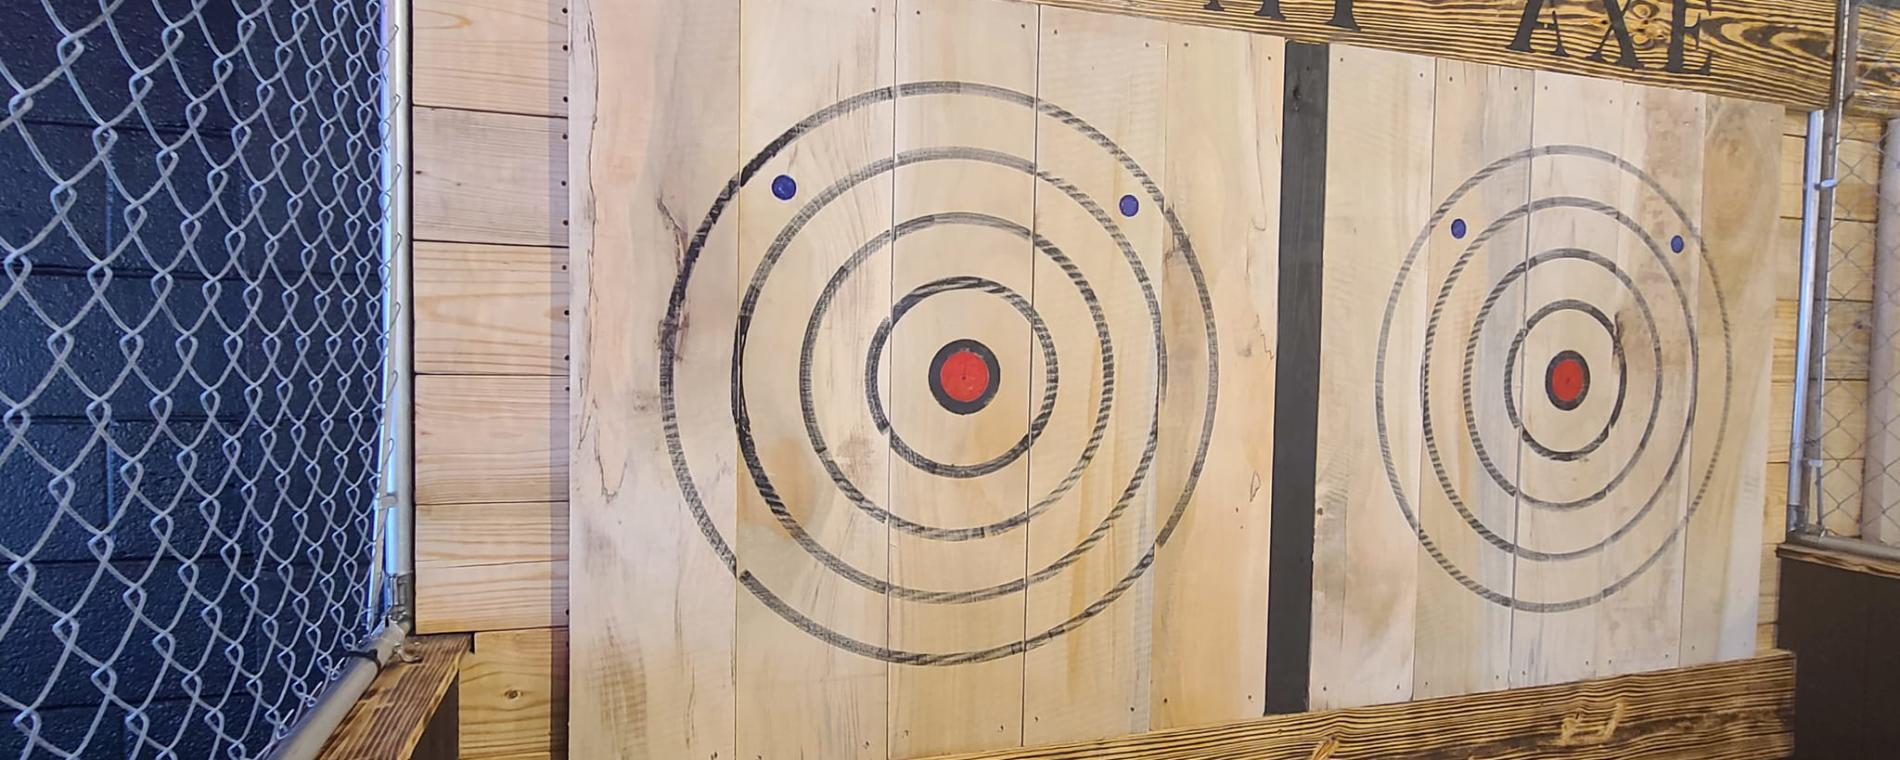 Targets Kiss My Axe Throwing